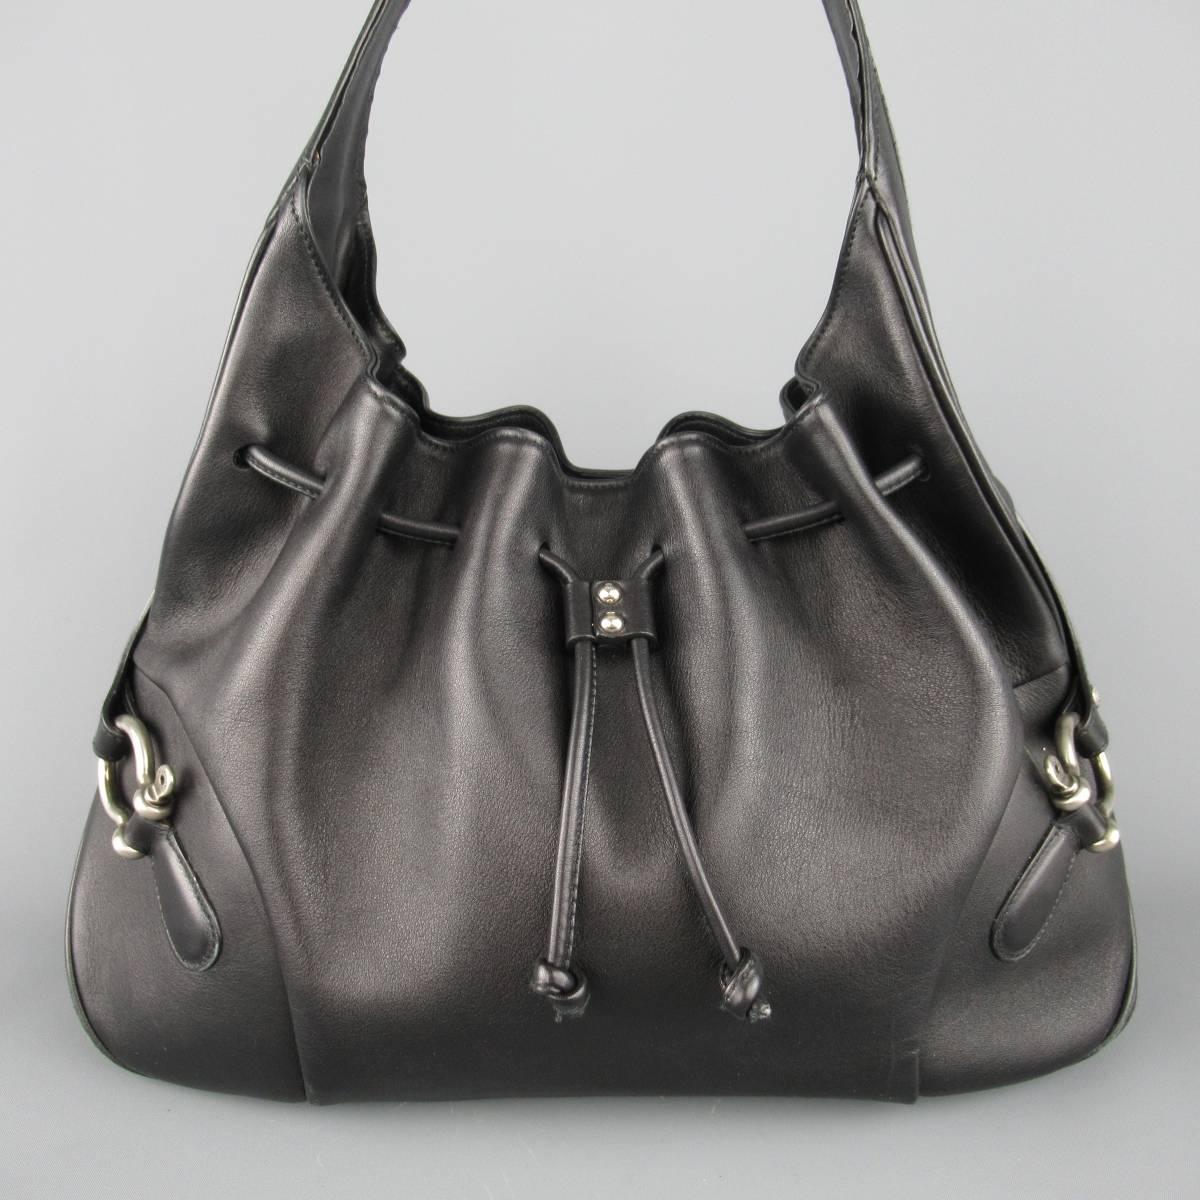 BURBERRY LONDON hobo shoulder bag comes in smooth black leather and features symmetrical harness side details with antiqued silver tone hardware, leather shoulder strap, and drawstring top with magnetic closure. Wear on lining and studs loose on